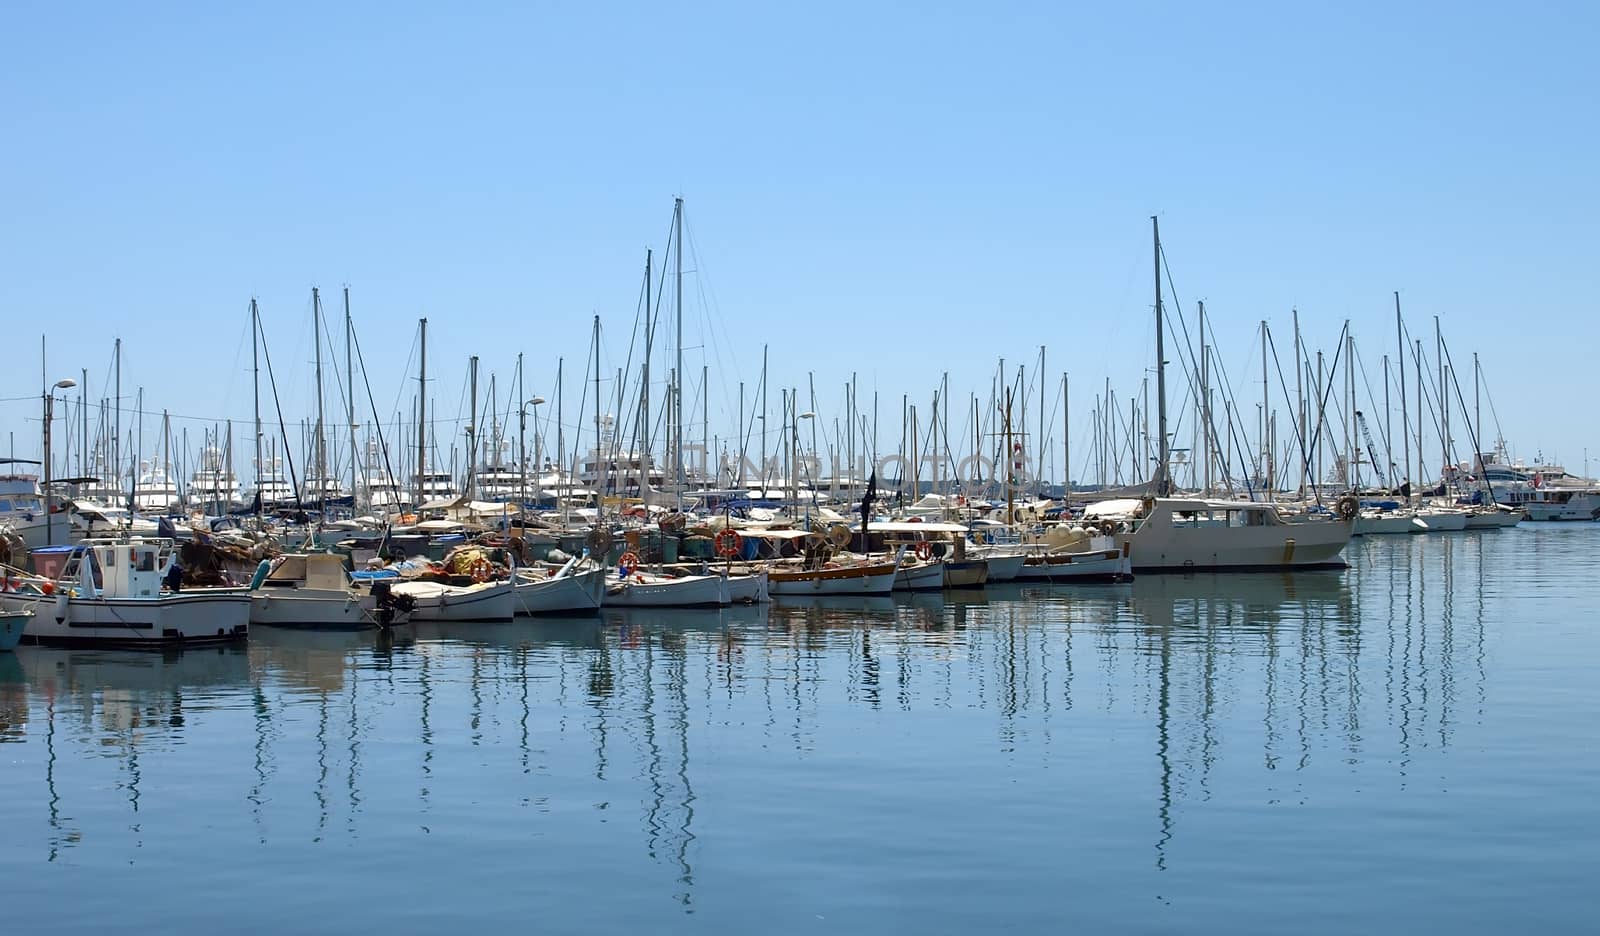 Yachts in the the harbor (Port Le Vieux) in Cannes, France.